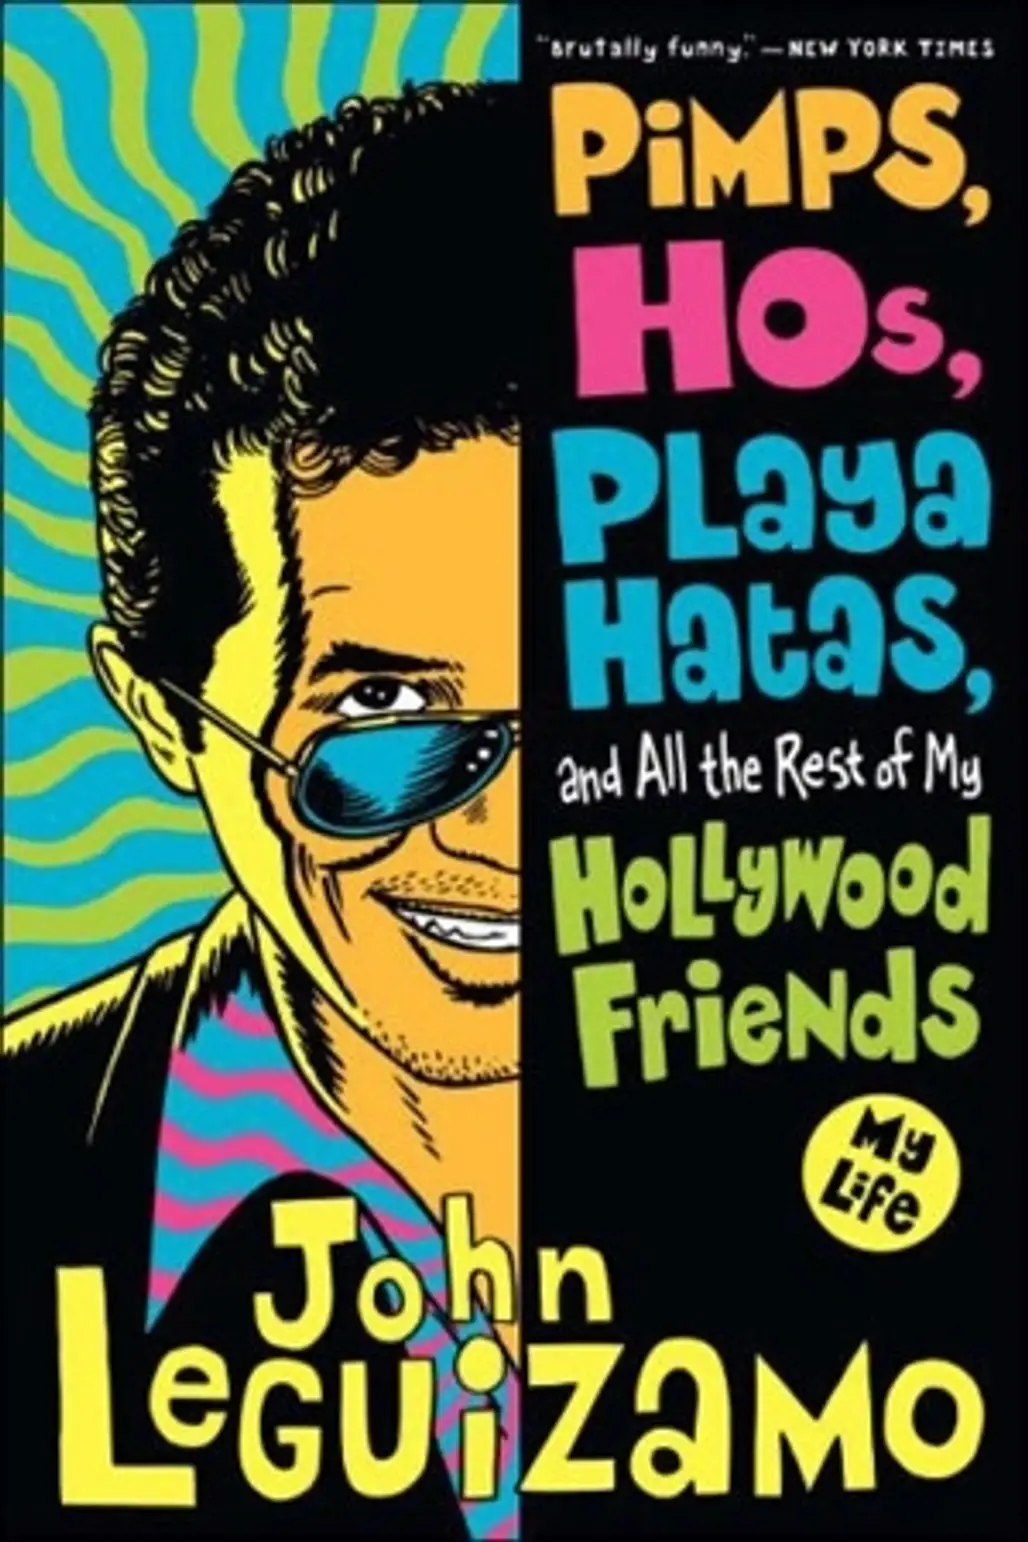 Pimps, Hos, Playa Hatas, and All the Rest of My Hollywood Friends, by John Leguizamo